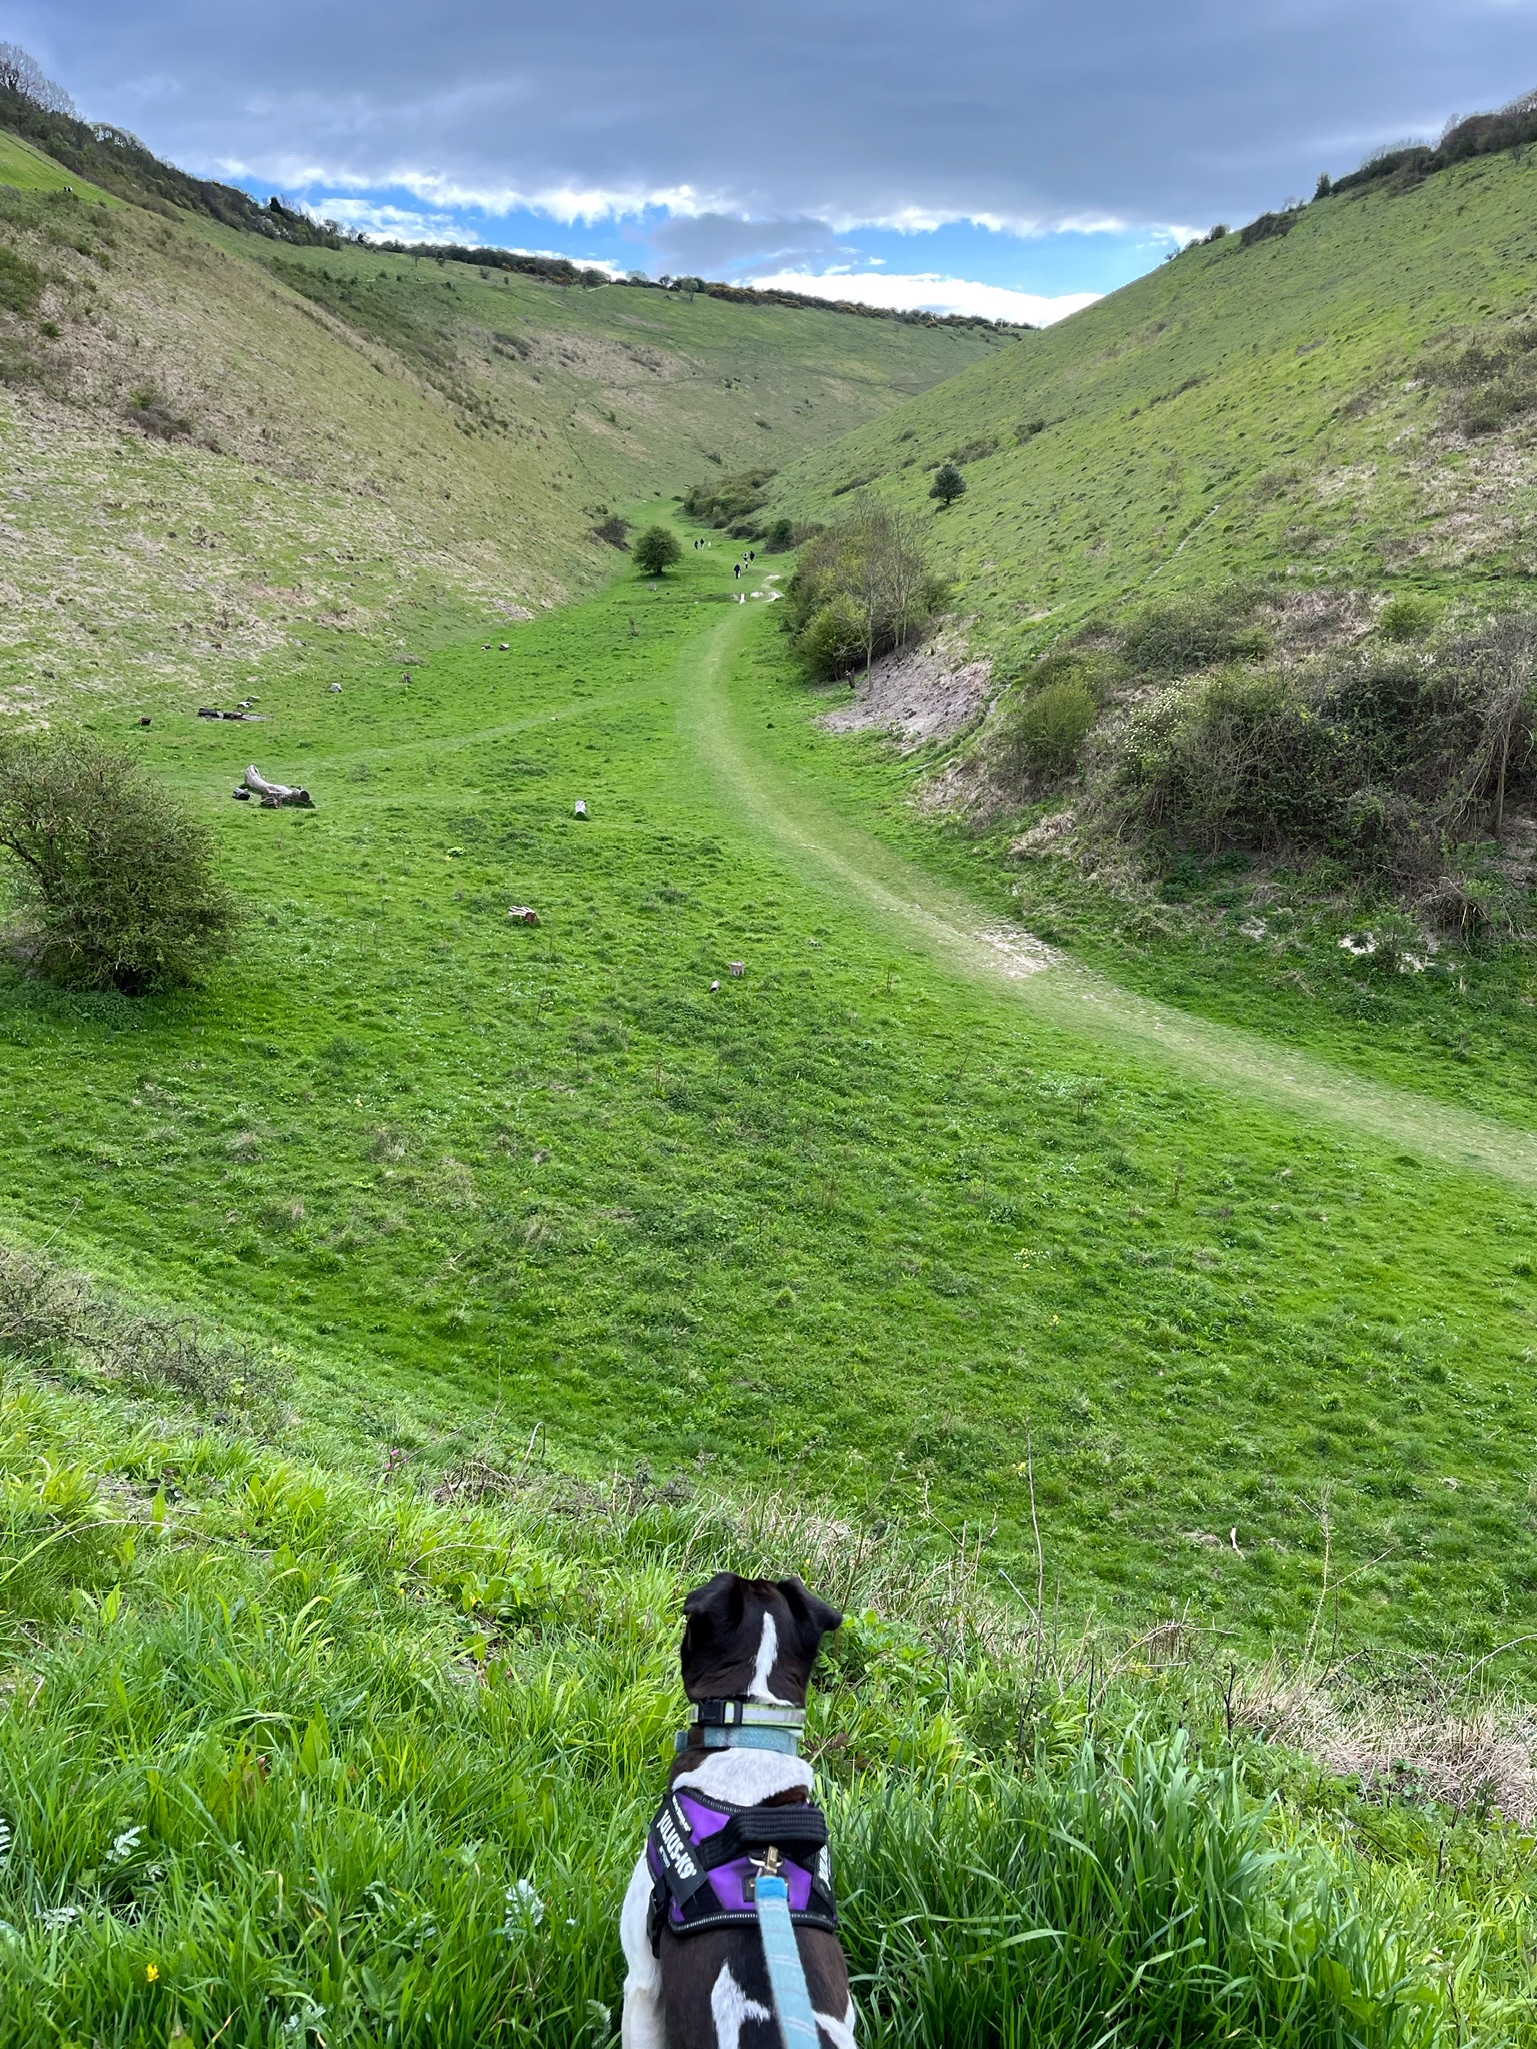 I went to Devil’s Dyke today